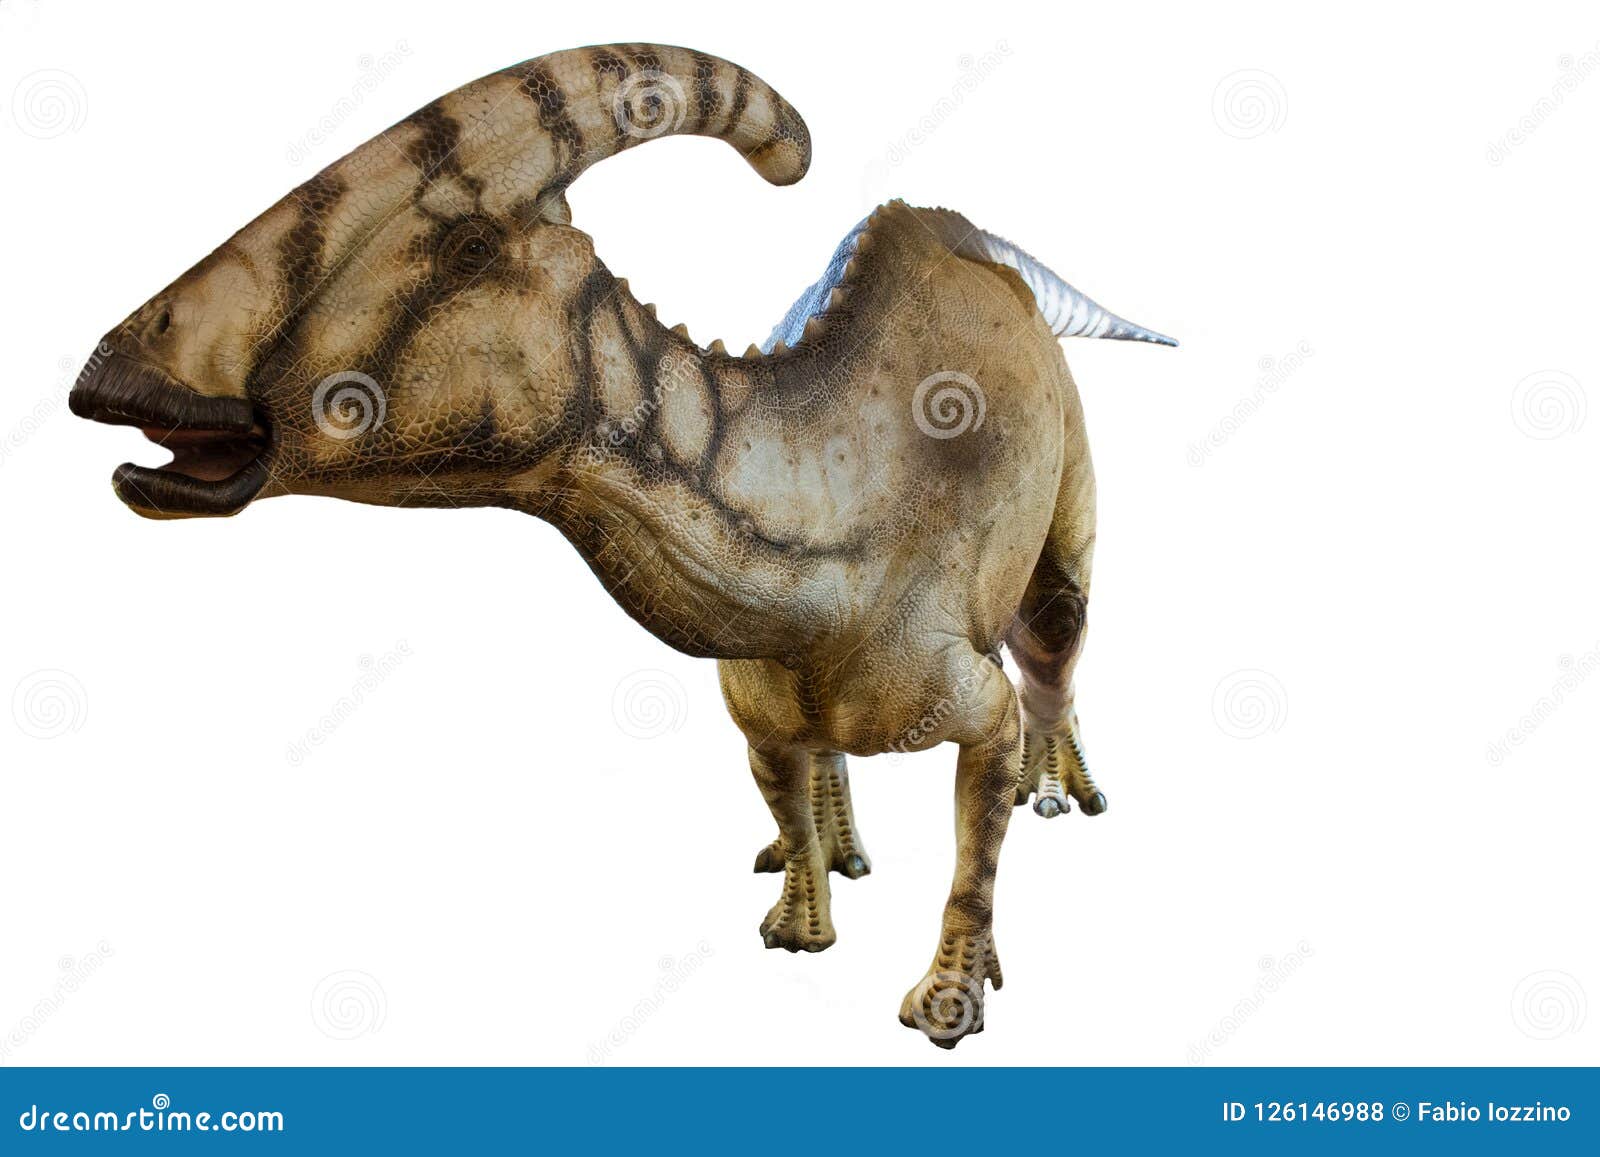 Portrait Of A Dinosaur Called Parasaurolophus On White Background Stock Photo Image Of Fauna Fight